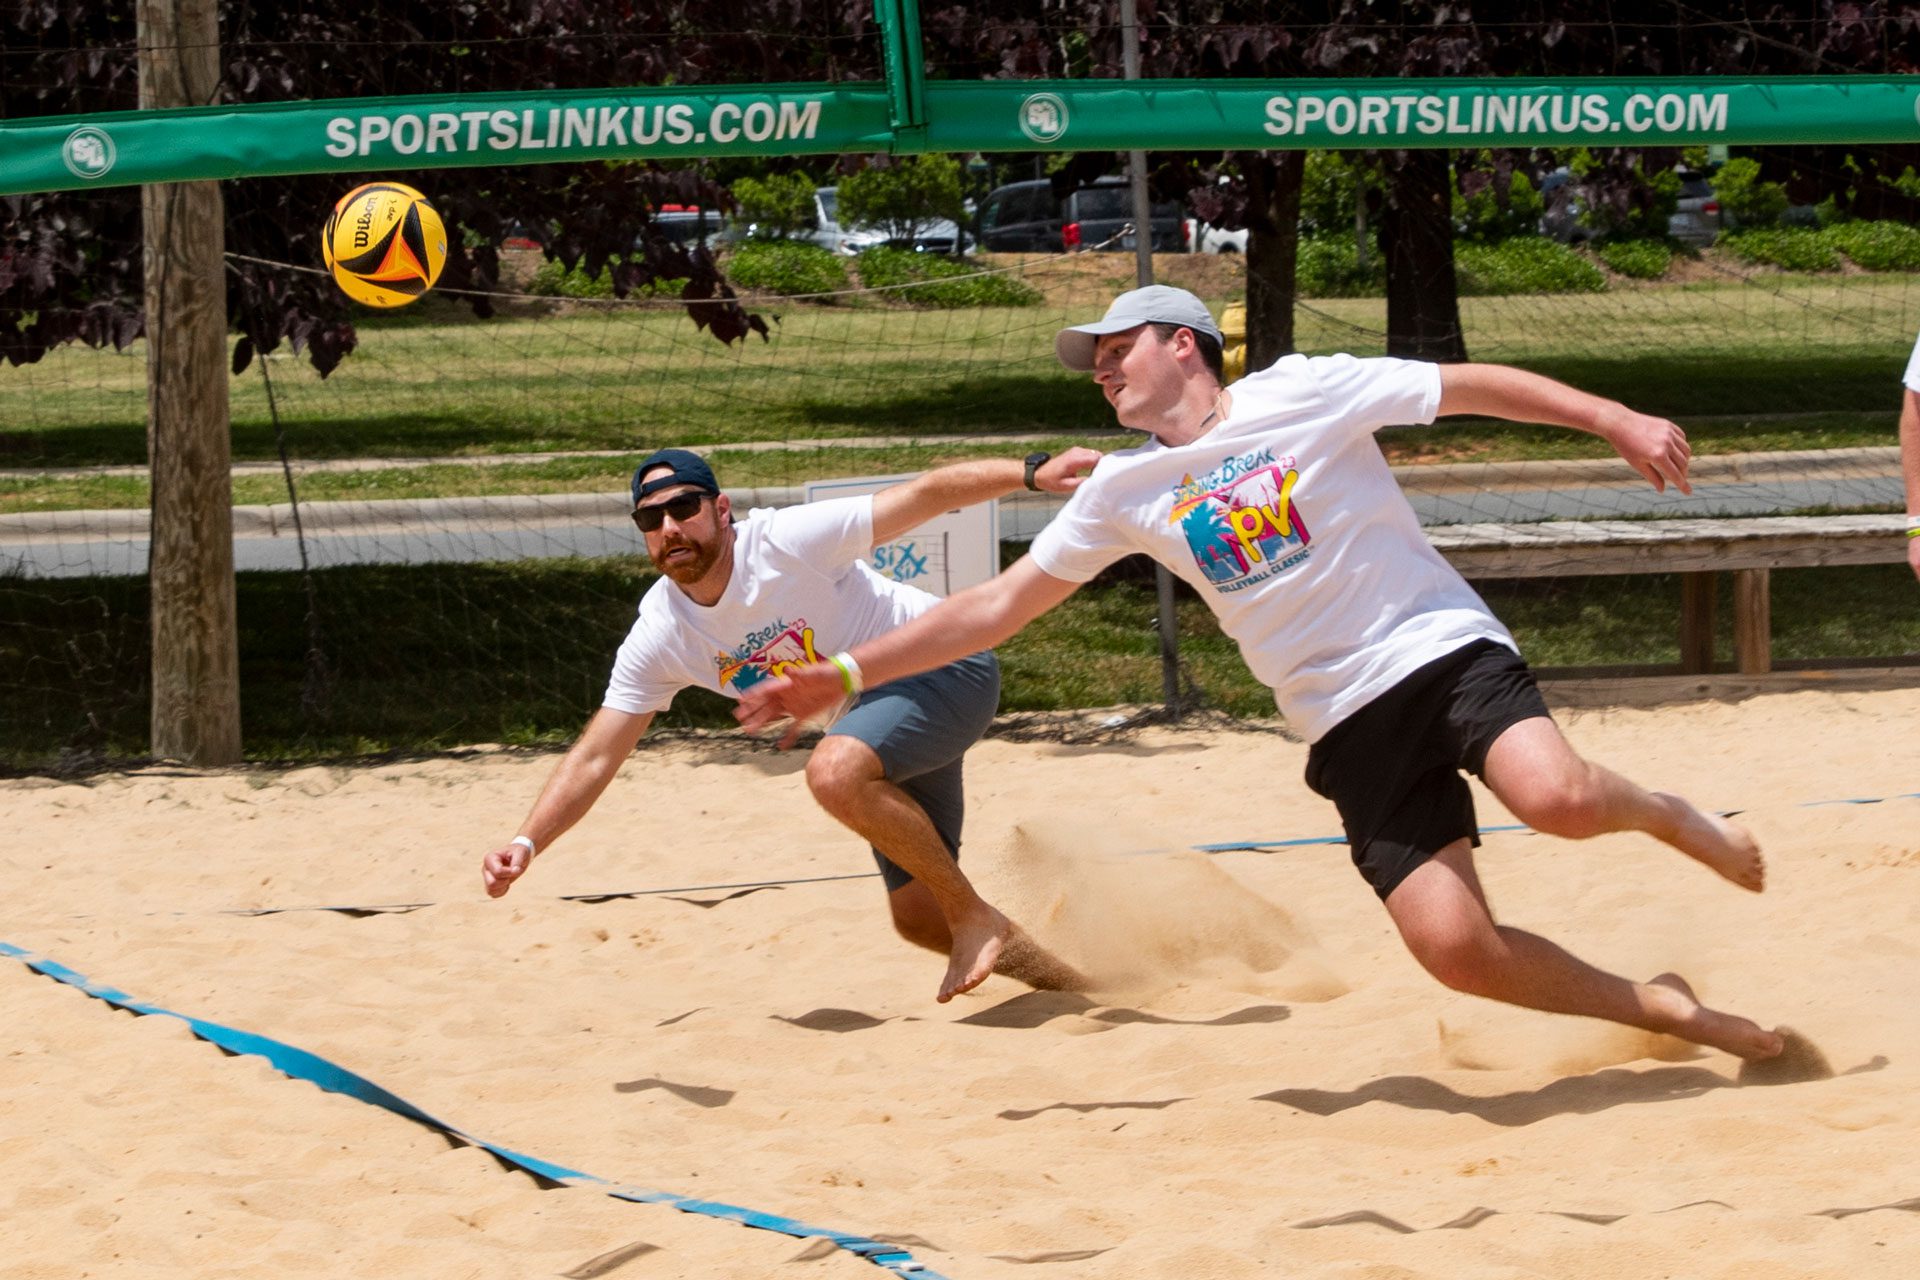 MPV volleyball action two players dive for a ball on a sand court